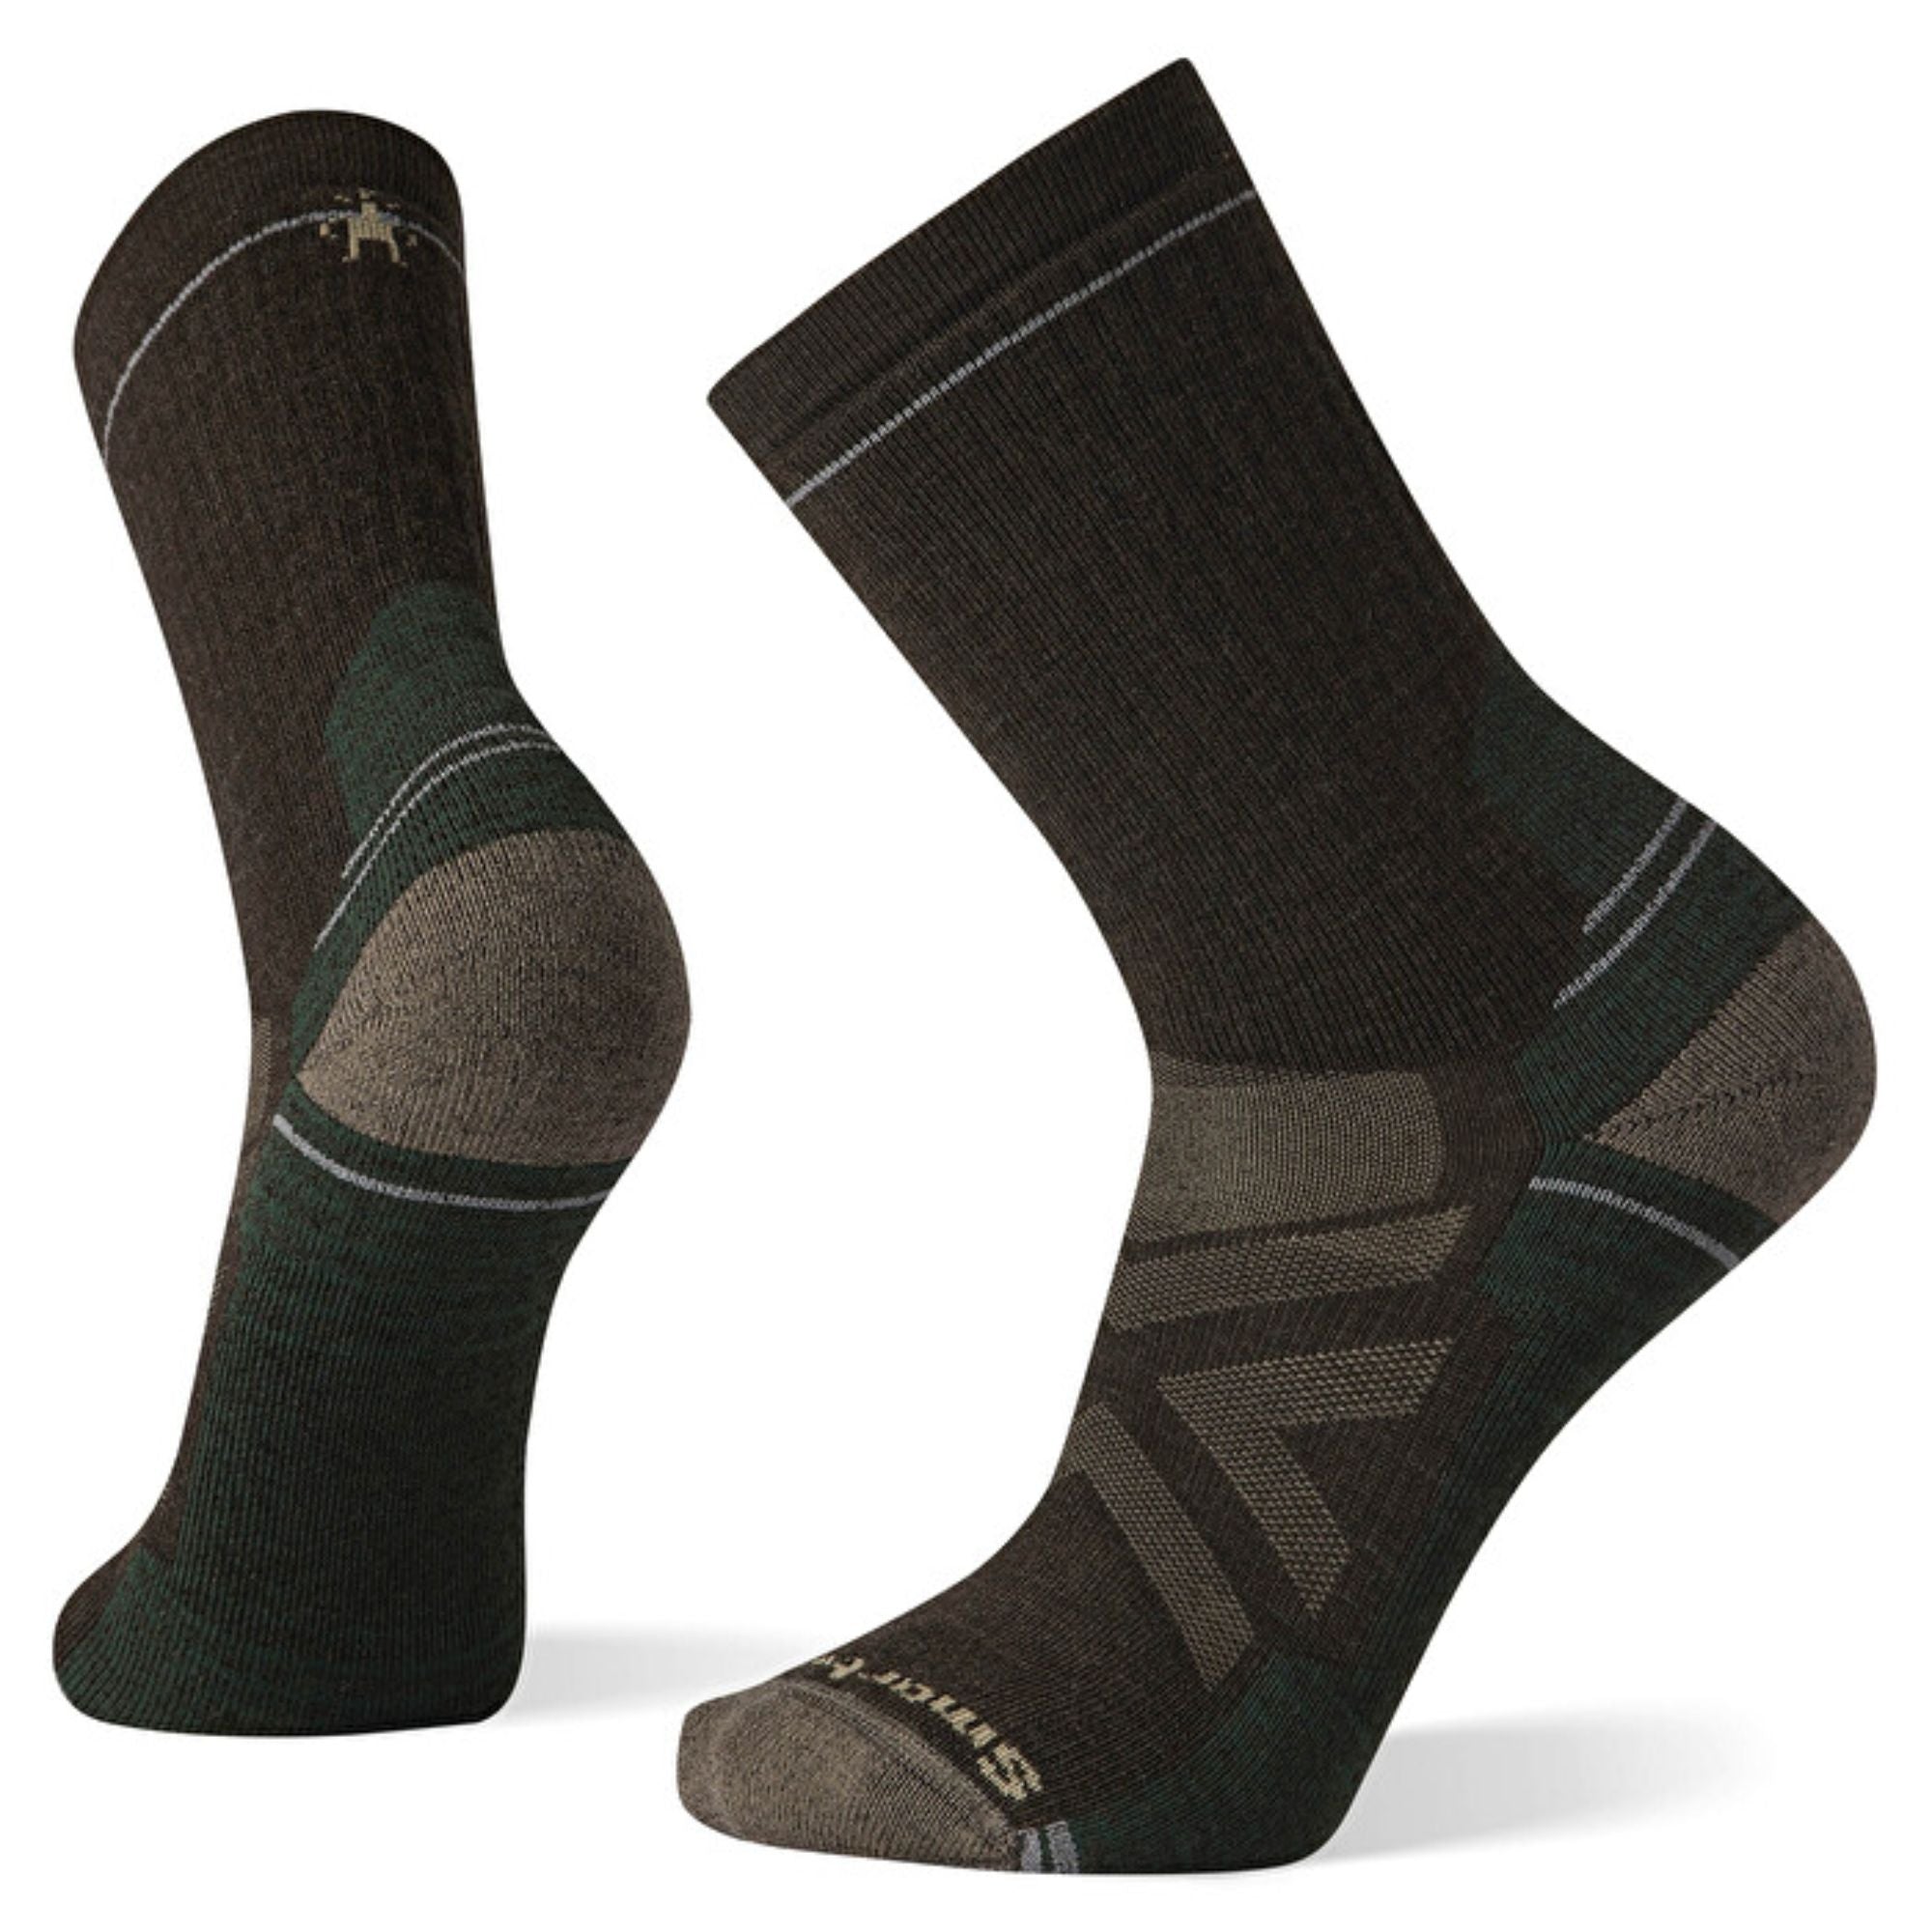 Smartwool Hike Full Cushion Crew Sock | SMARTWOOL | Portwest - The Outdoor Shop